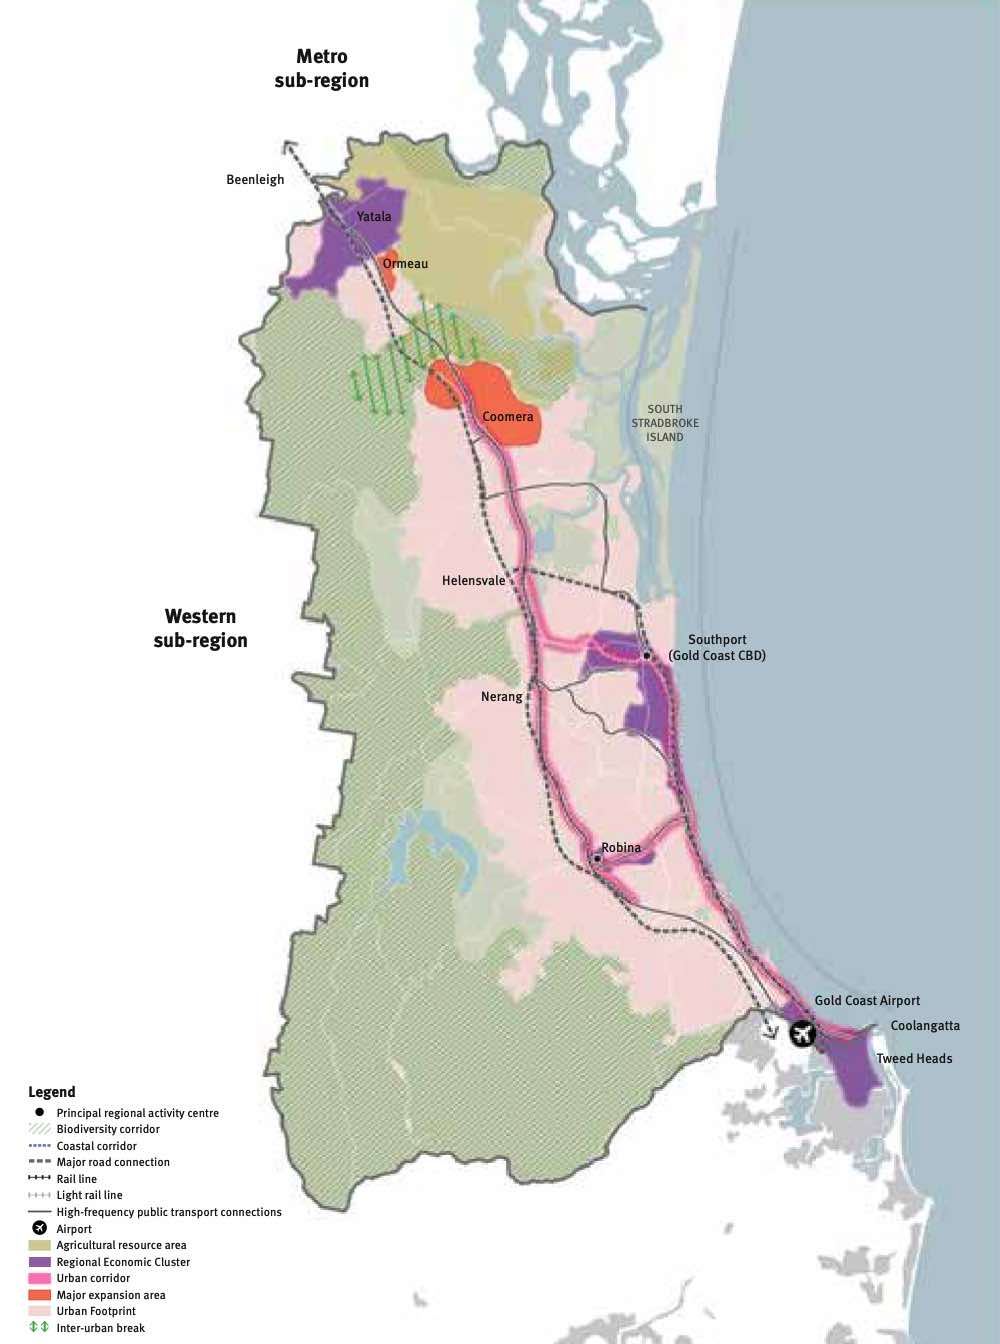 The Southern sub-region in South East Queensland’s regional plan¹